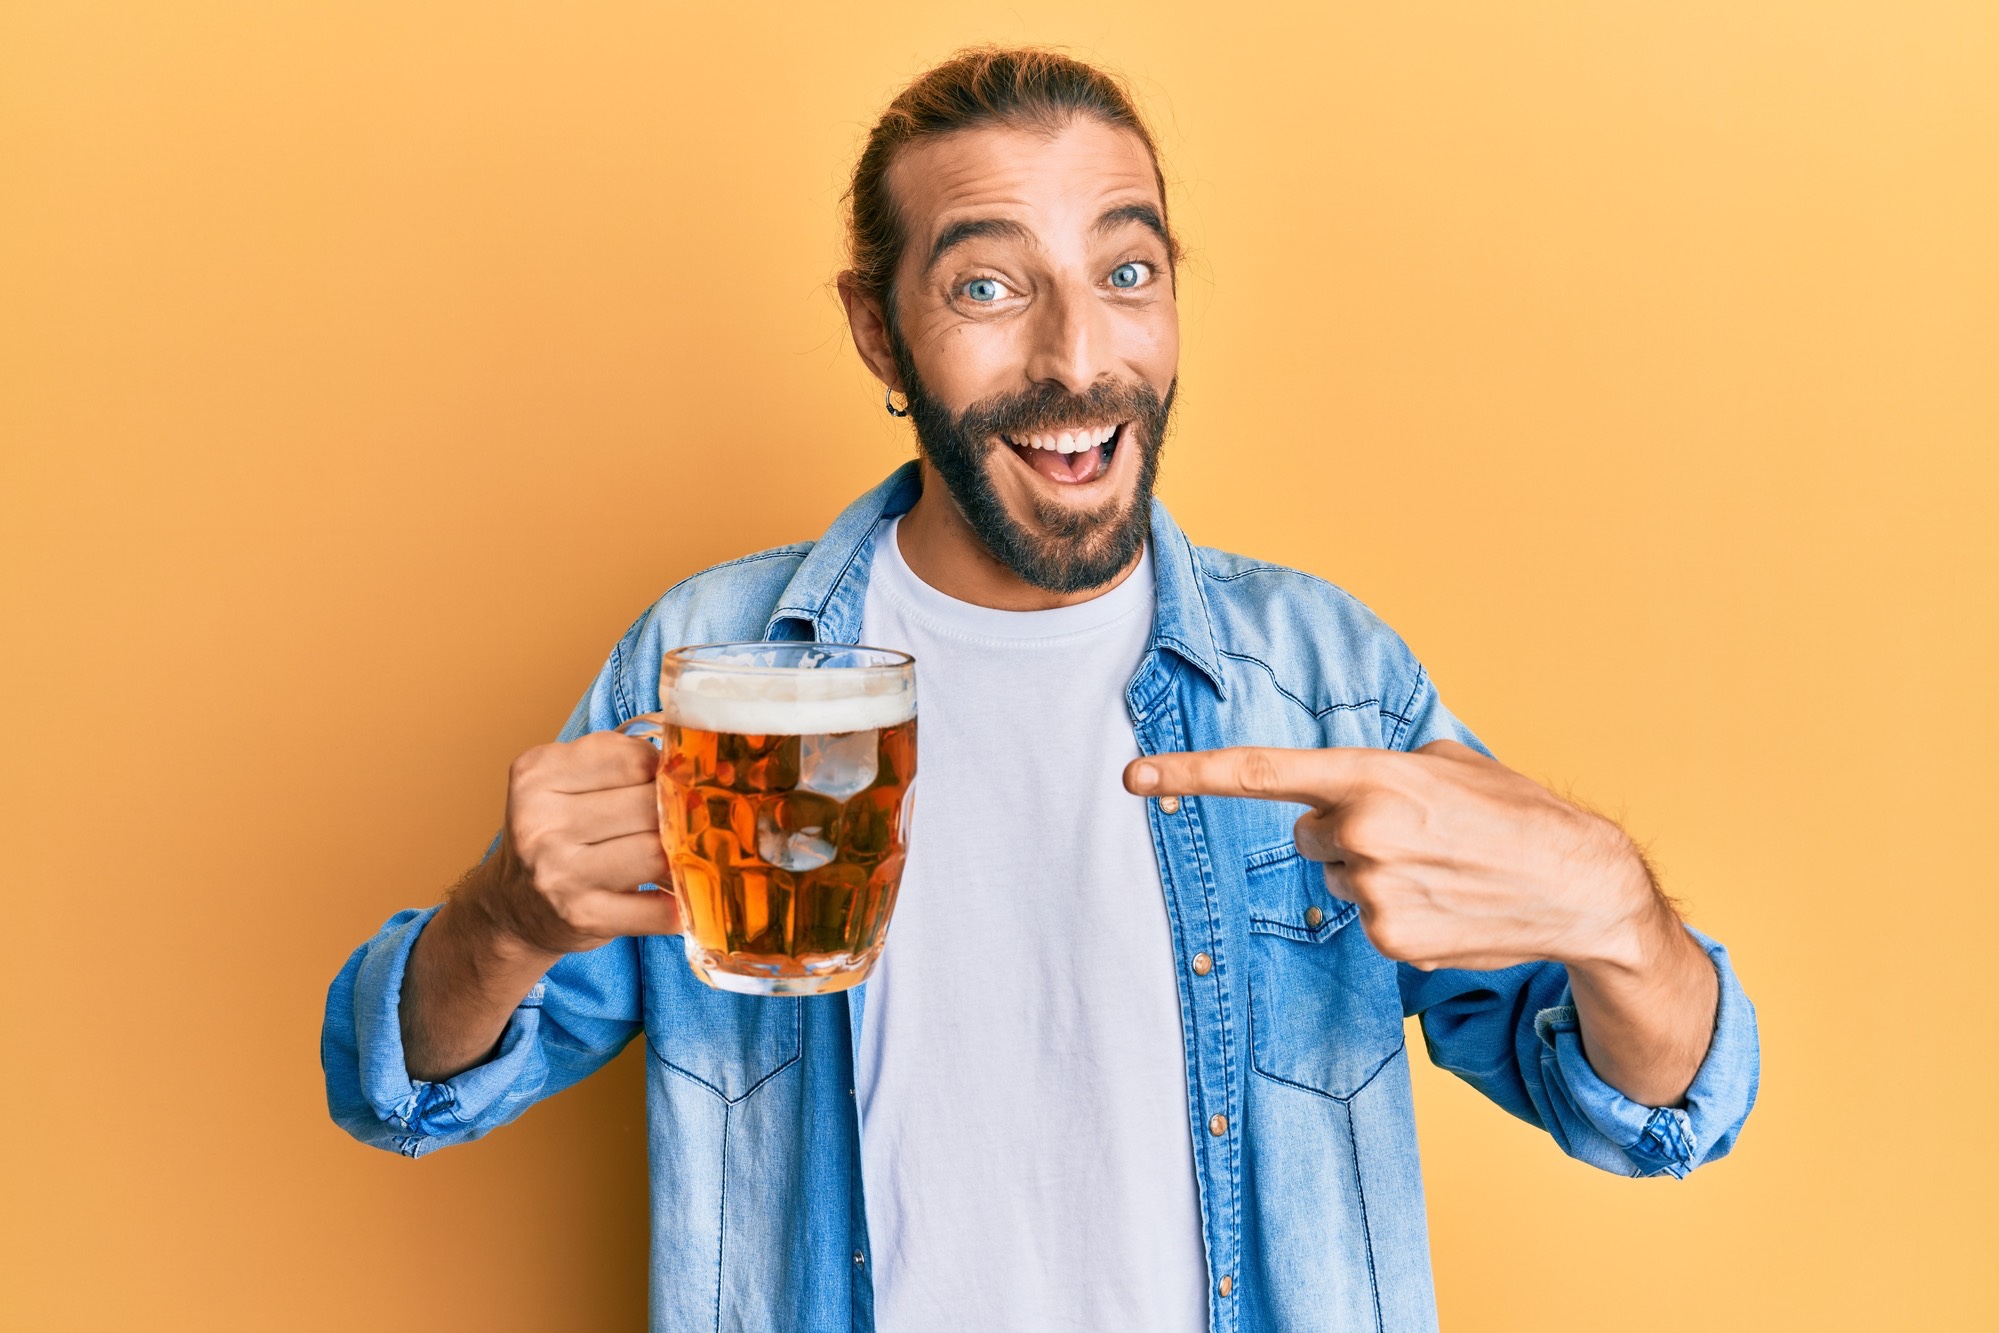 11 Low Carb Beers That Actually Taste Good